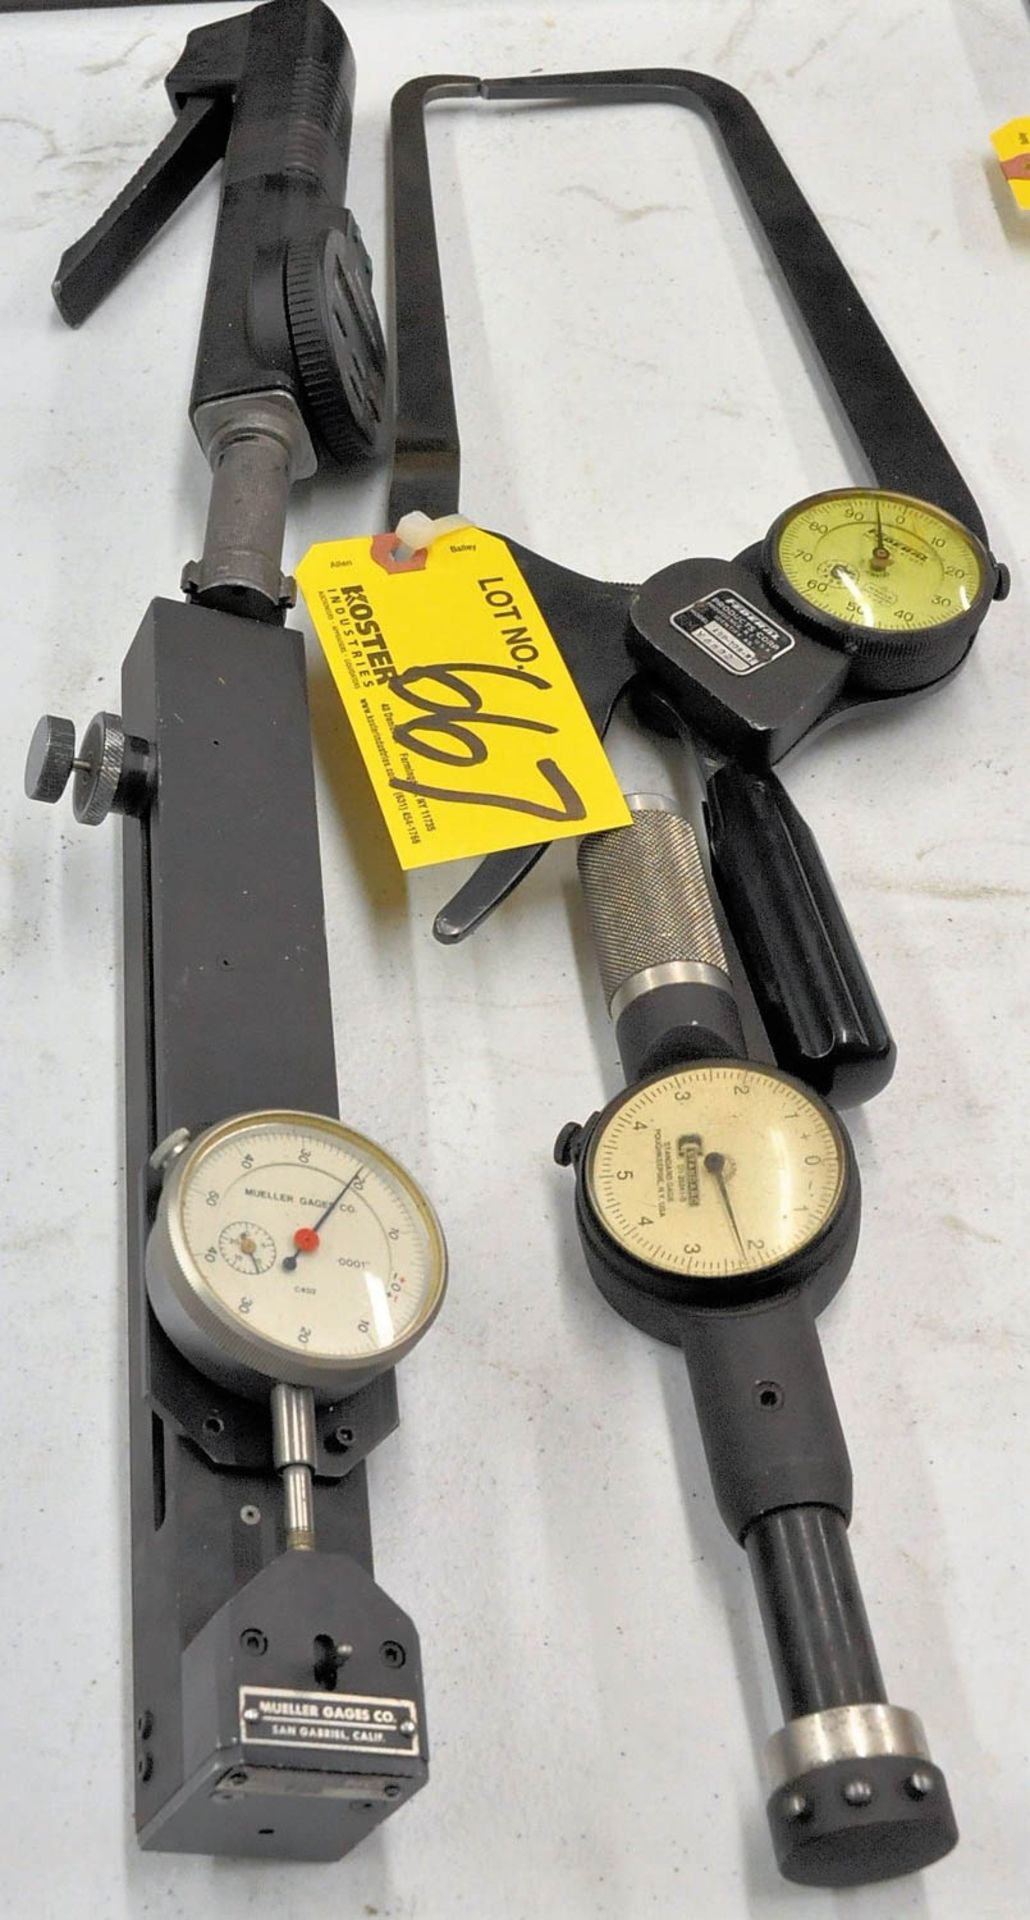 (1) Mitutoyo Borematic Digital Bore Gage, (1) Standard Dial Bore Gage, (1) Mueller Dial Force Gage